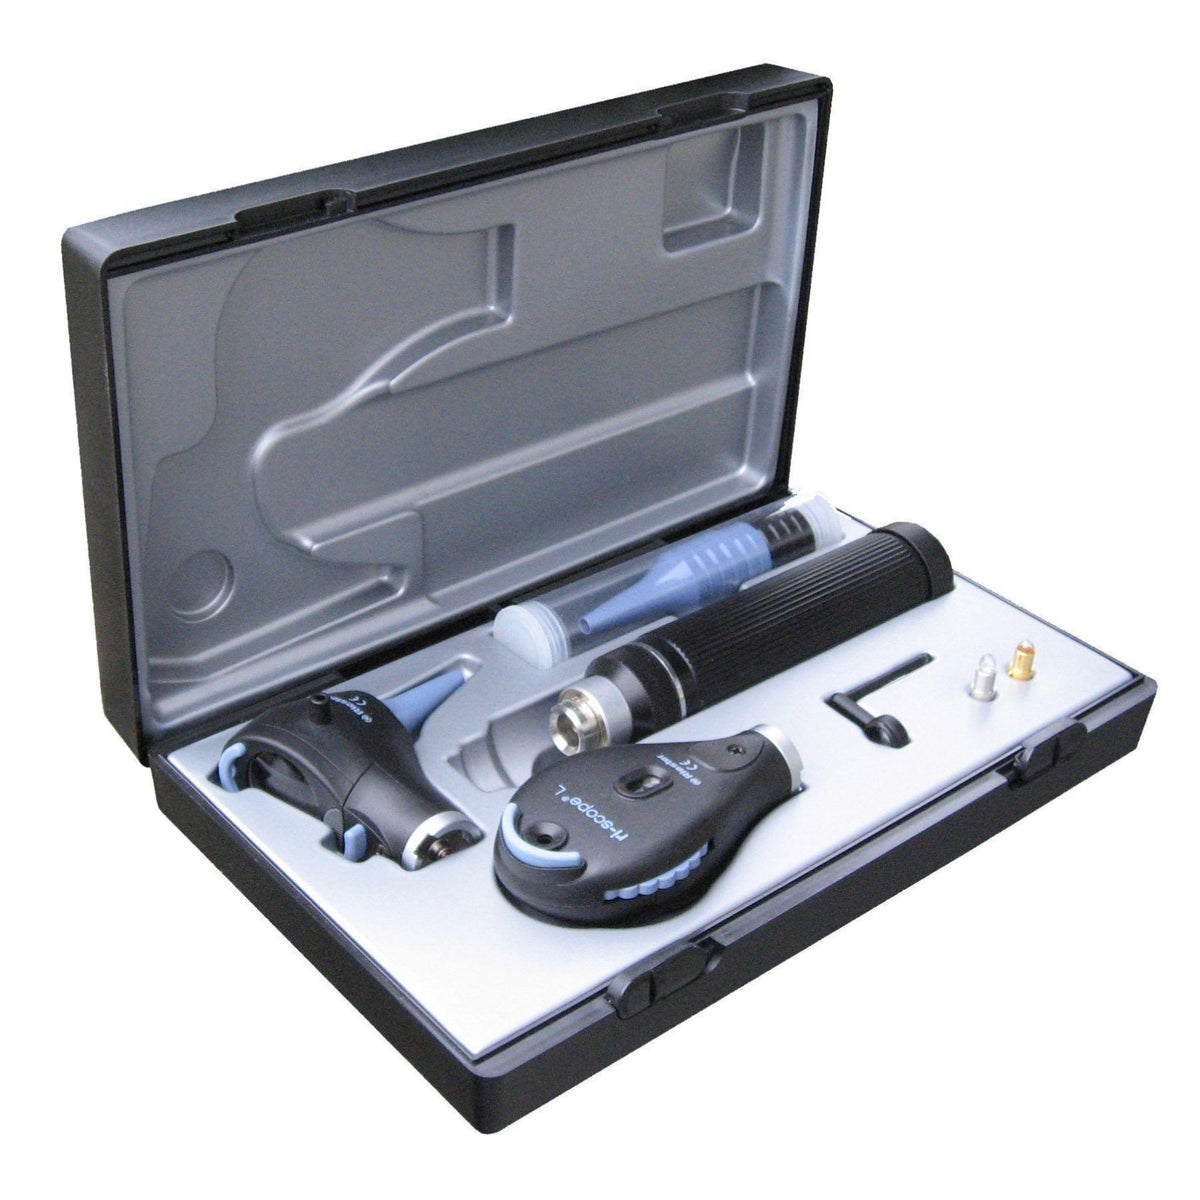 Riester Ri-Scope L Otoscope / Ophthalmoscope L3/L2 LED/XL 3.5 V C Handle for 2 Lithium Batteries